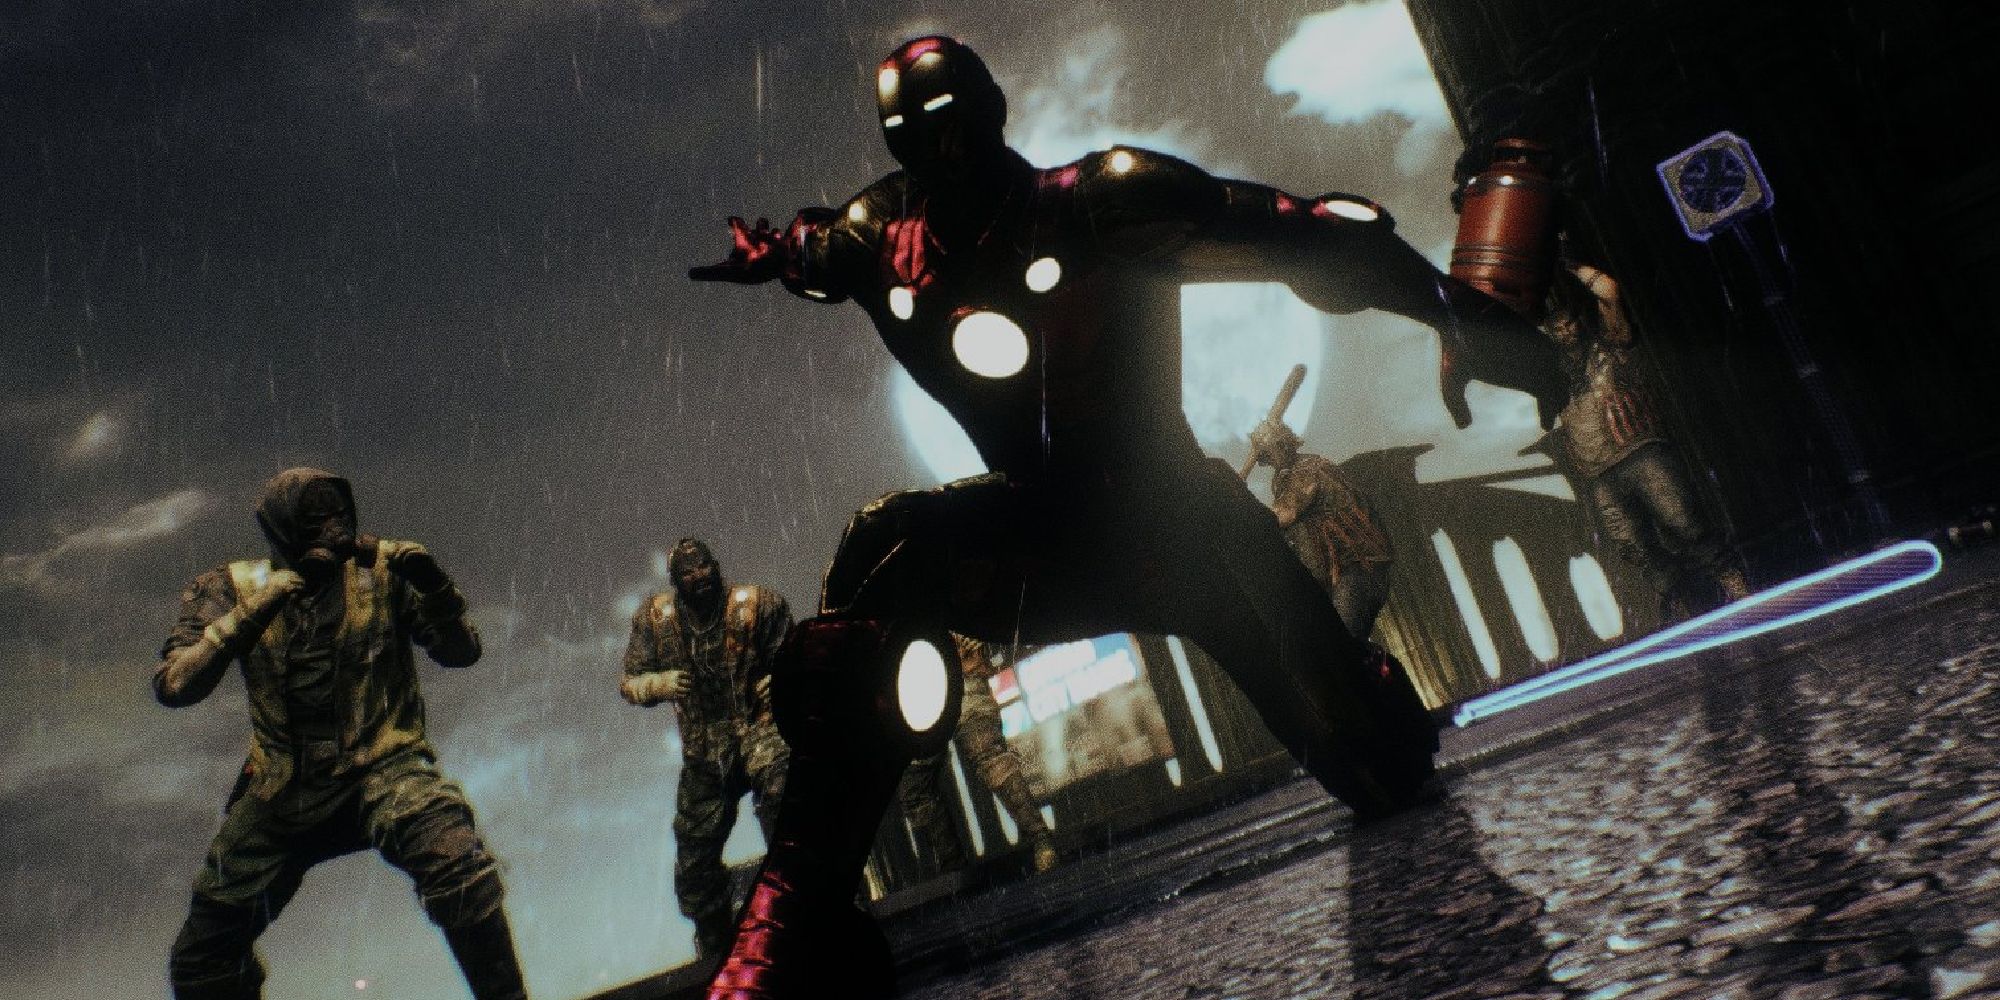 Iron Man in Arkham Knight posing in front of goons